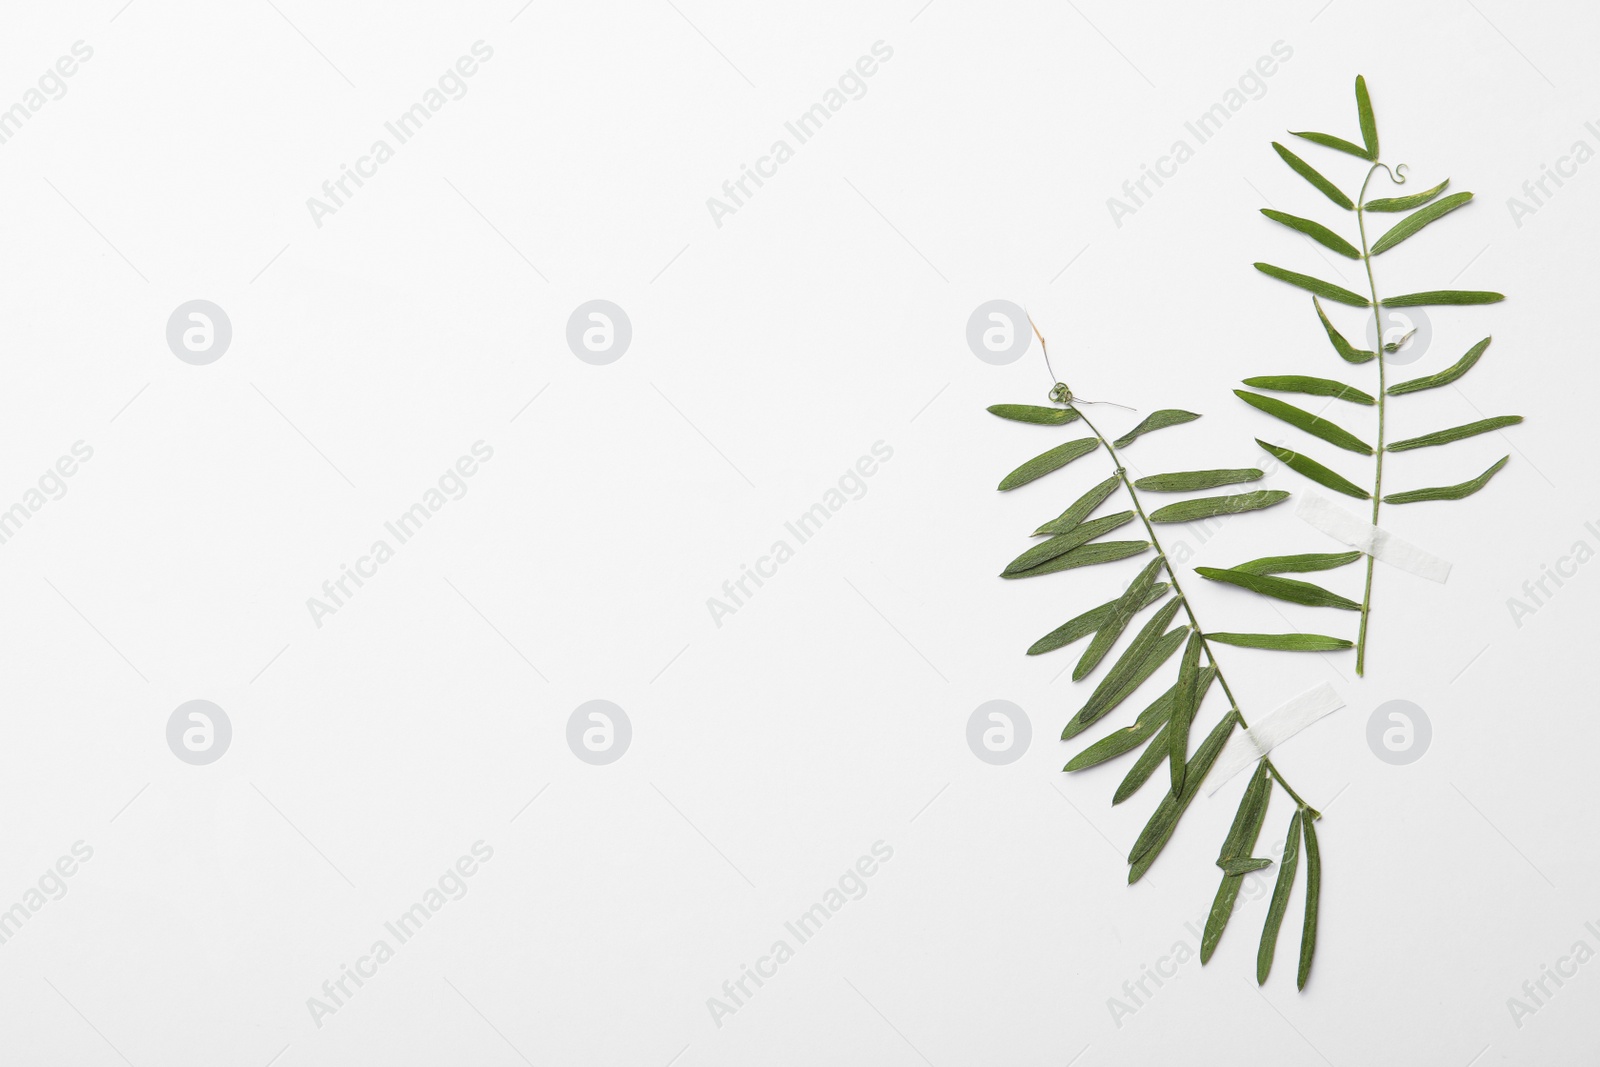 Photo of Pressed dried plant leaves on white background. Beautiful herbarium